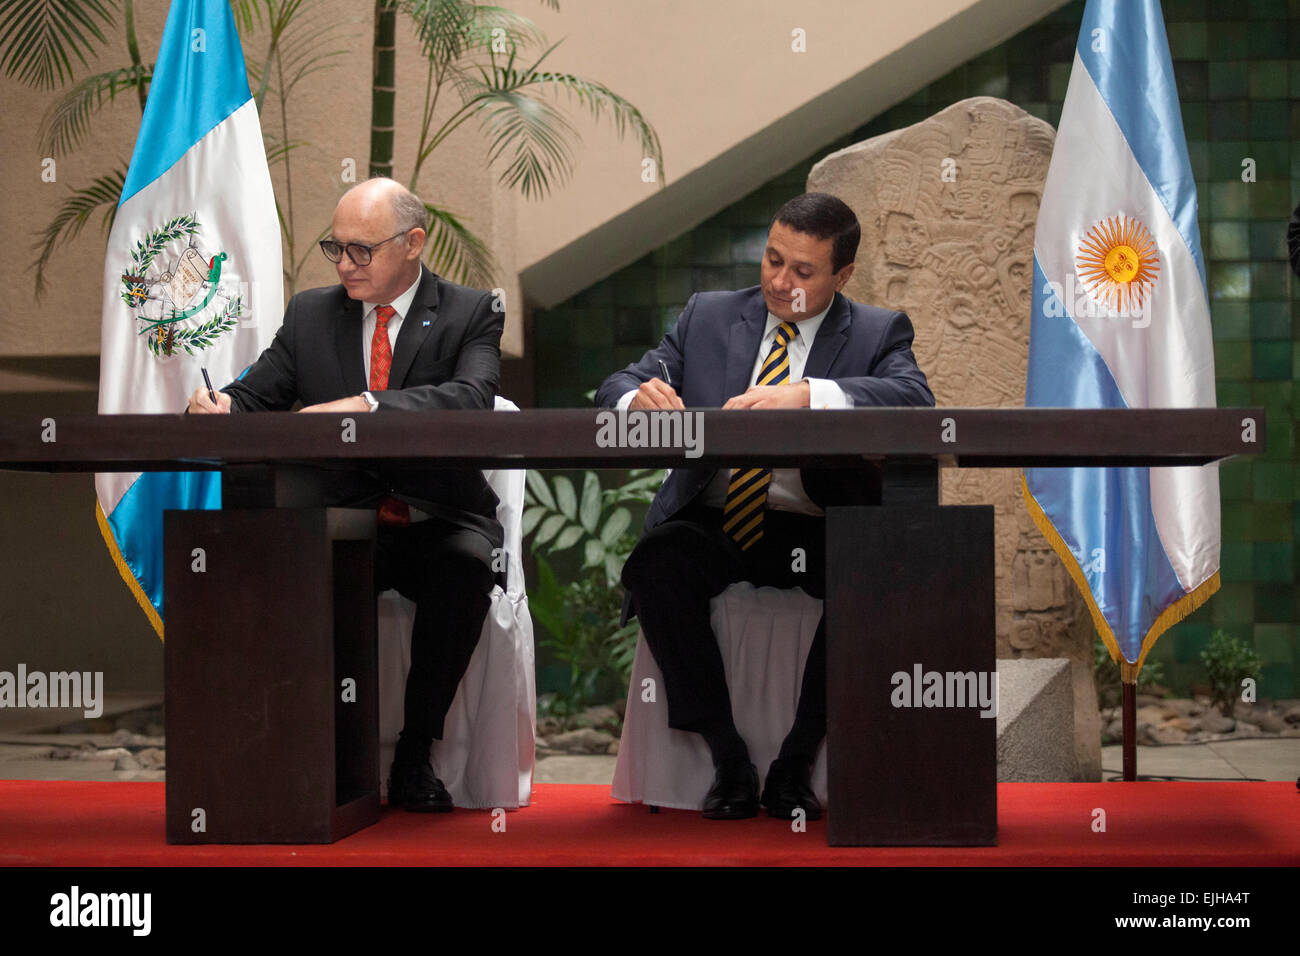 Guatemala City, Guatemala. 26th Mar, 2015. Guatemalan Minister of Foreign Affairs Carlos Raul Morales (R) and his Argentine counterpart Hector Timerman sign a bilateral agreement at Ministry of Foreing Affairs of Guatemala in Guatemala City, capital of Guatemala, on March 26, 2015. © Luis Echeverria/Xinhua/Alamy Live News Stock Photo